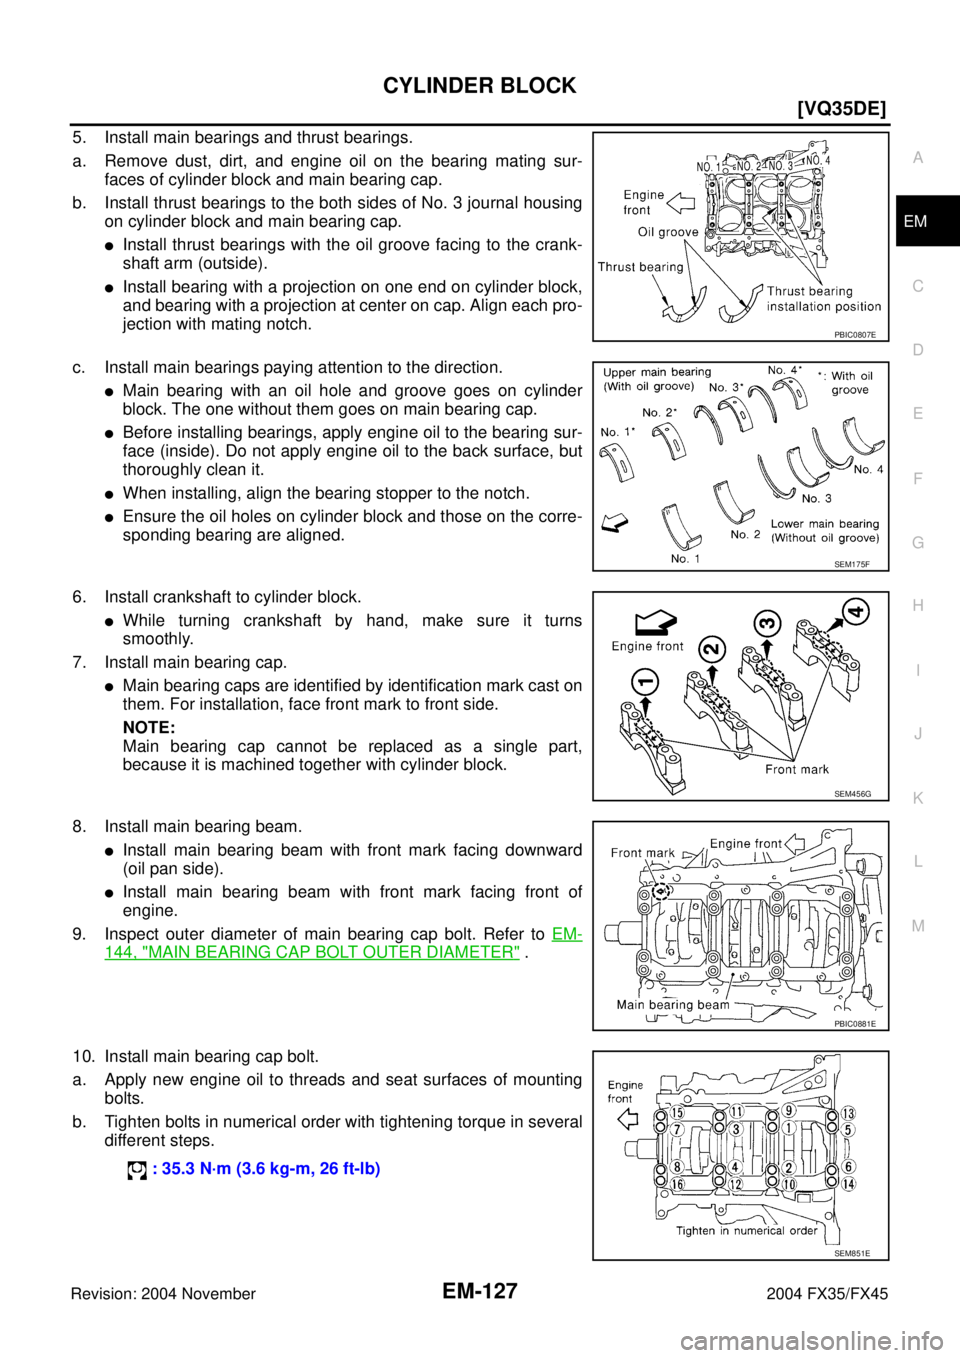 INFINITI FX35 2004  Service Manual CYLINDER BLOCK
EM-127
[VQ35DE]
C
D
E
F
G
H
I
J
K
L
MA
EM
Revision: 2004 November 2004 FX35/FX45
5. Install main bearings and thrust bearings.
a. Remove dust, dirt, and engine oil on the bearing mating